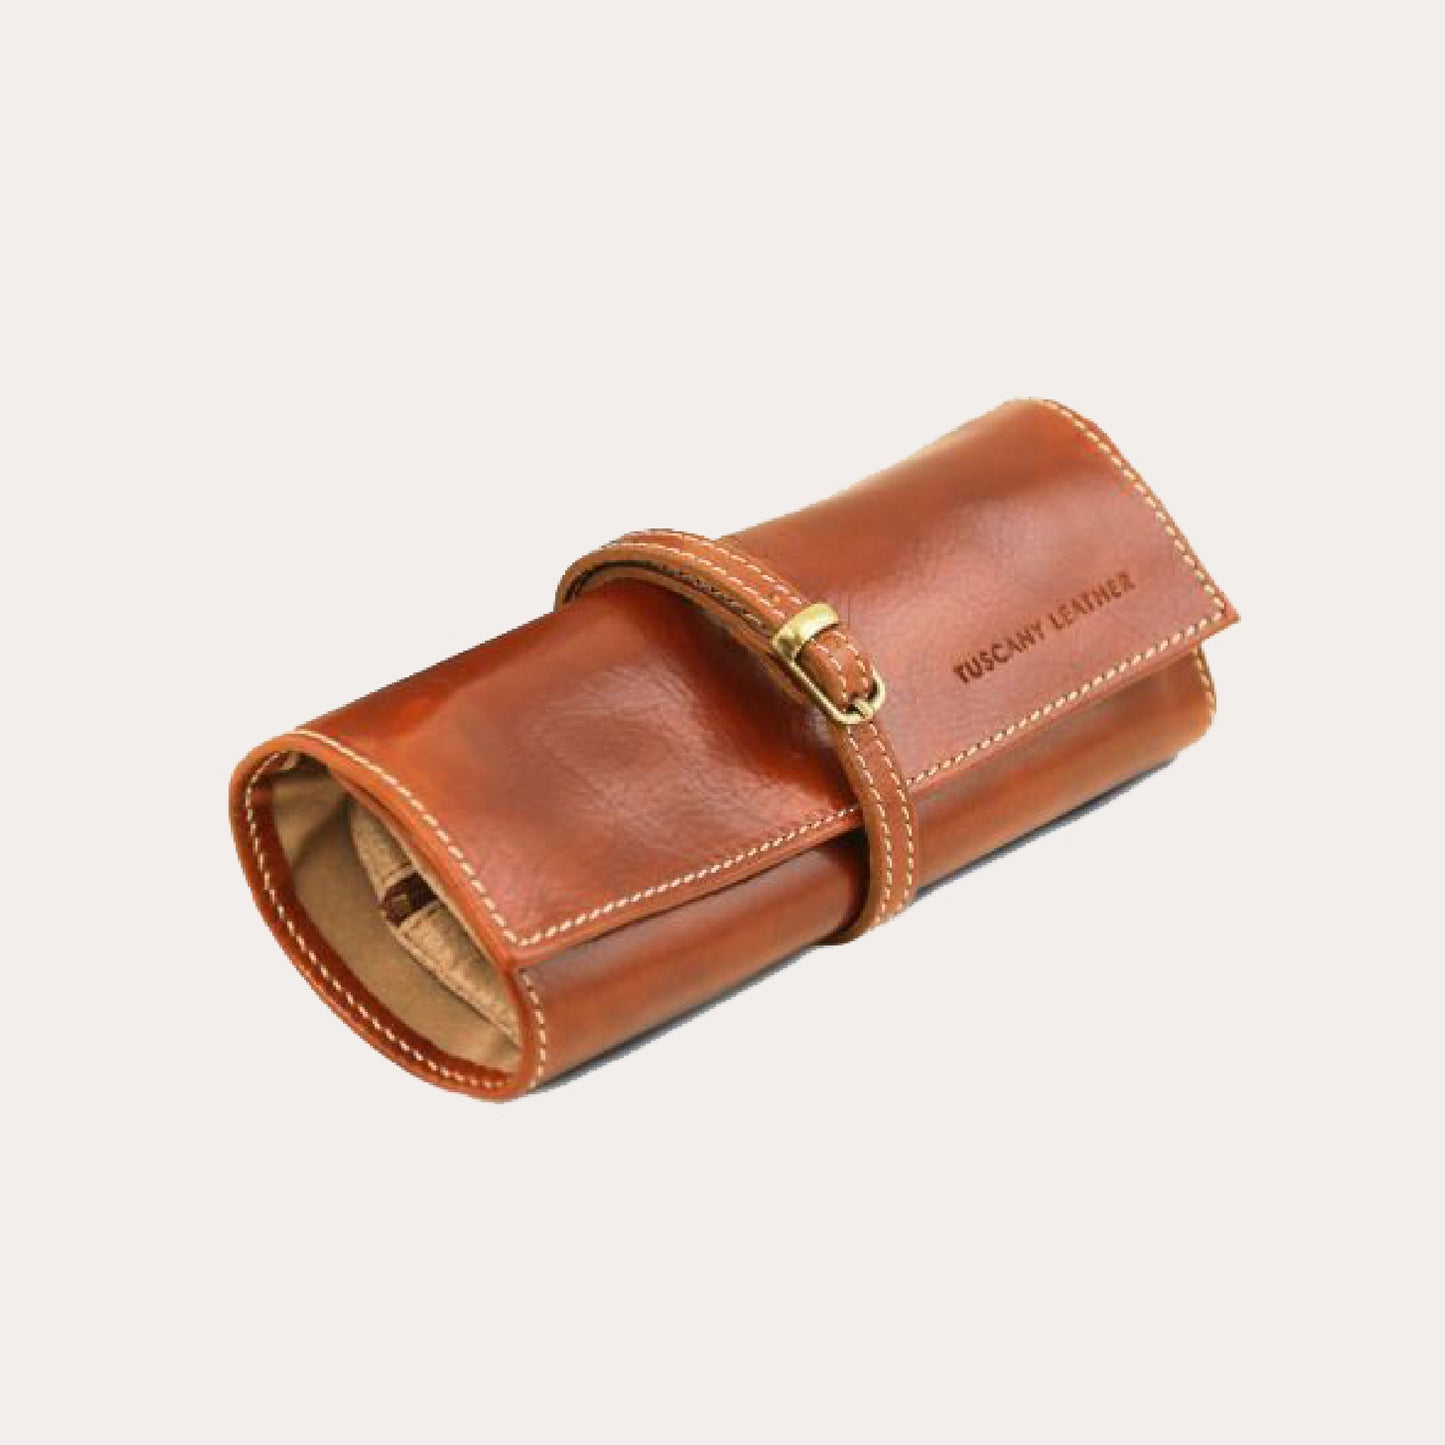 Tuscany Leather Honey Leather Jewellery Roll